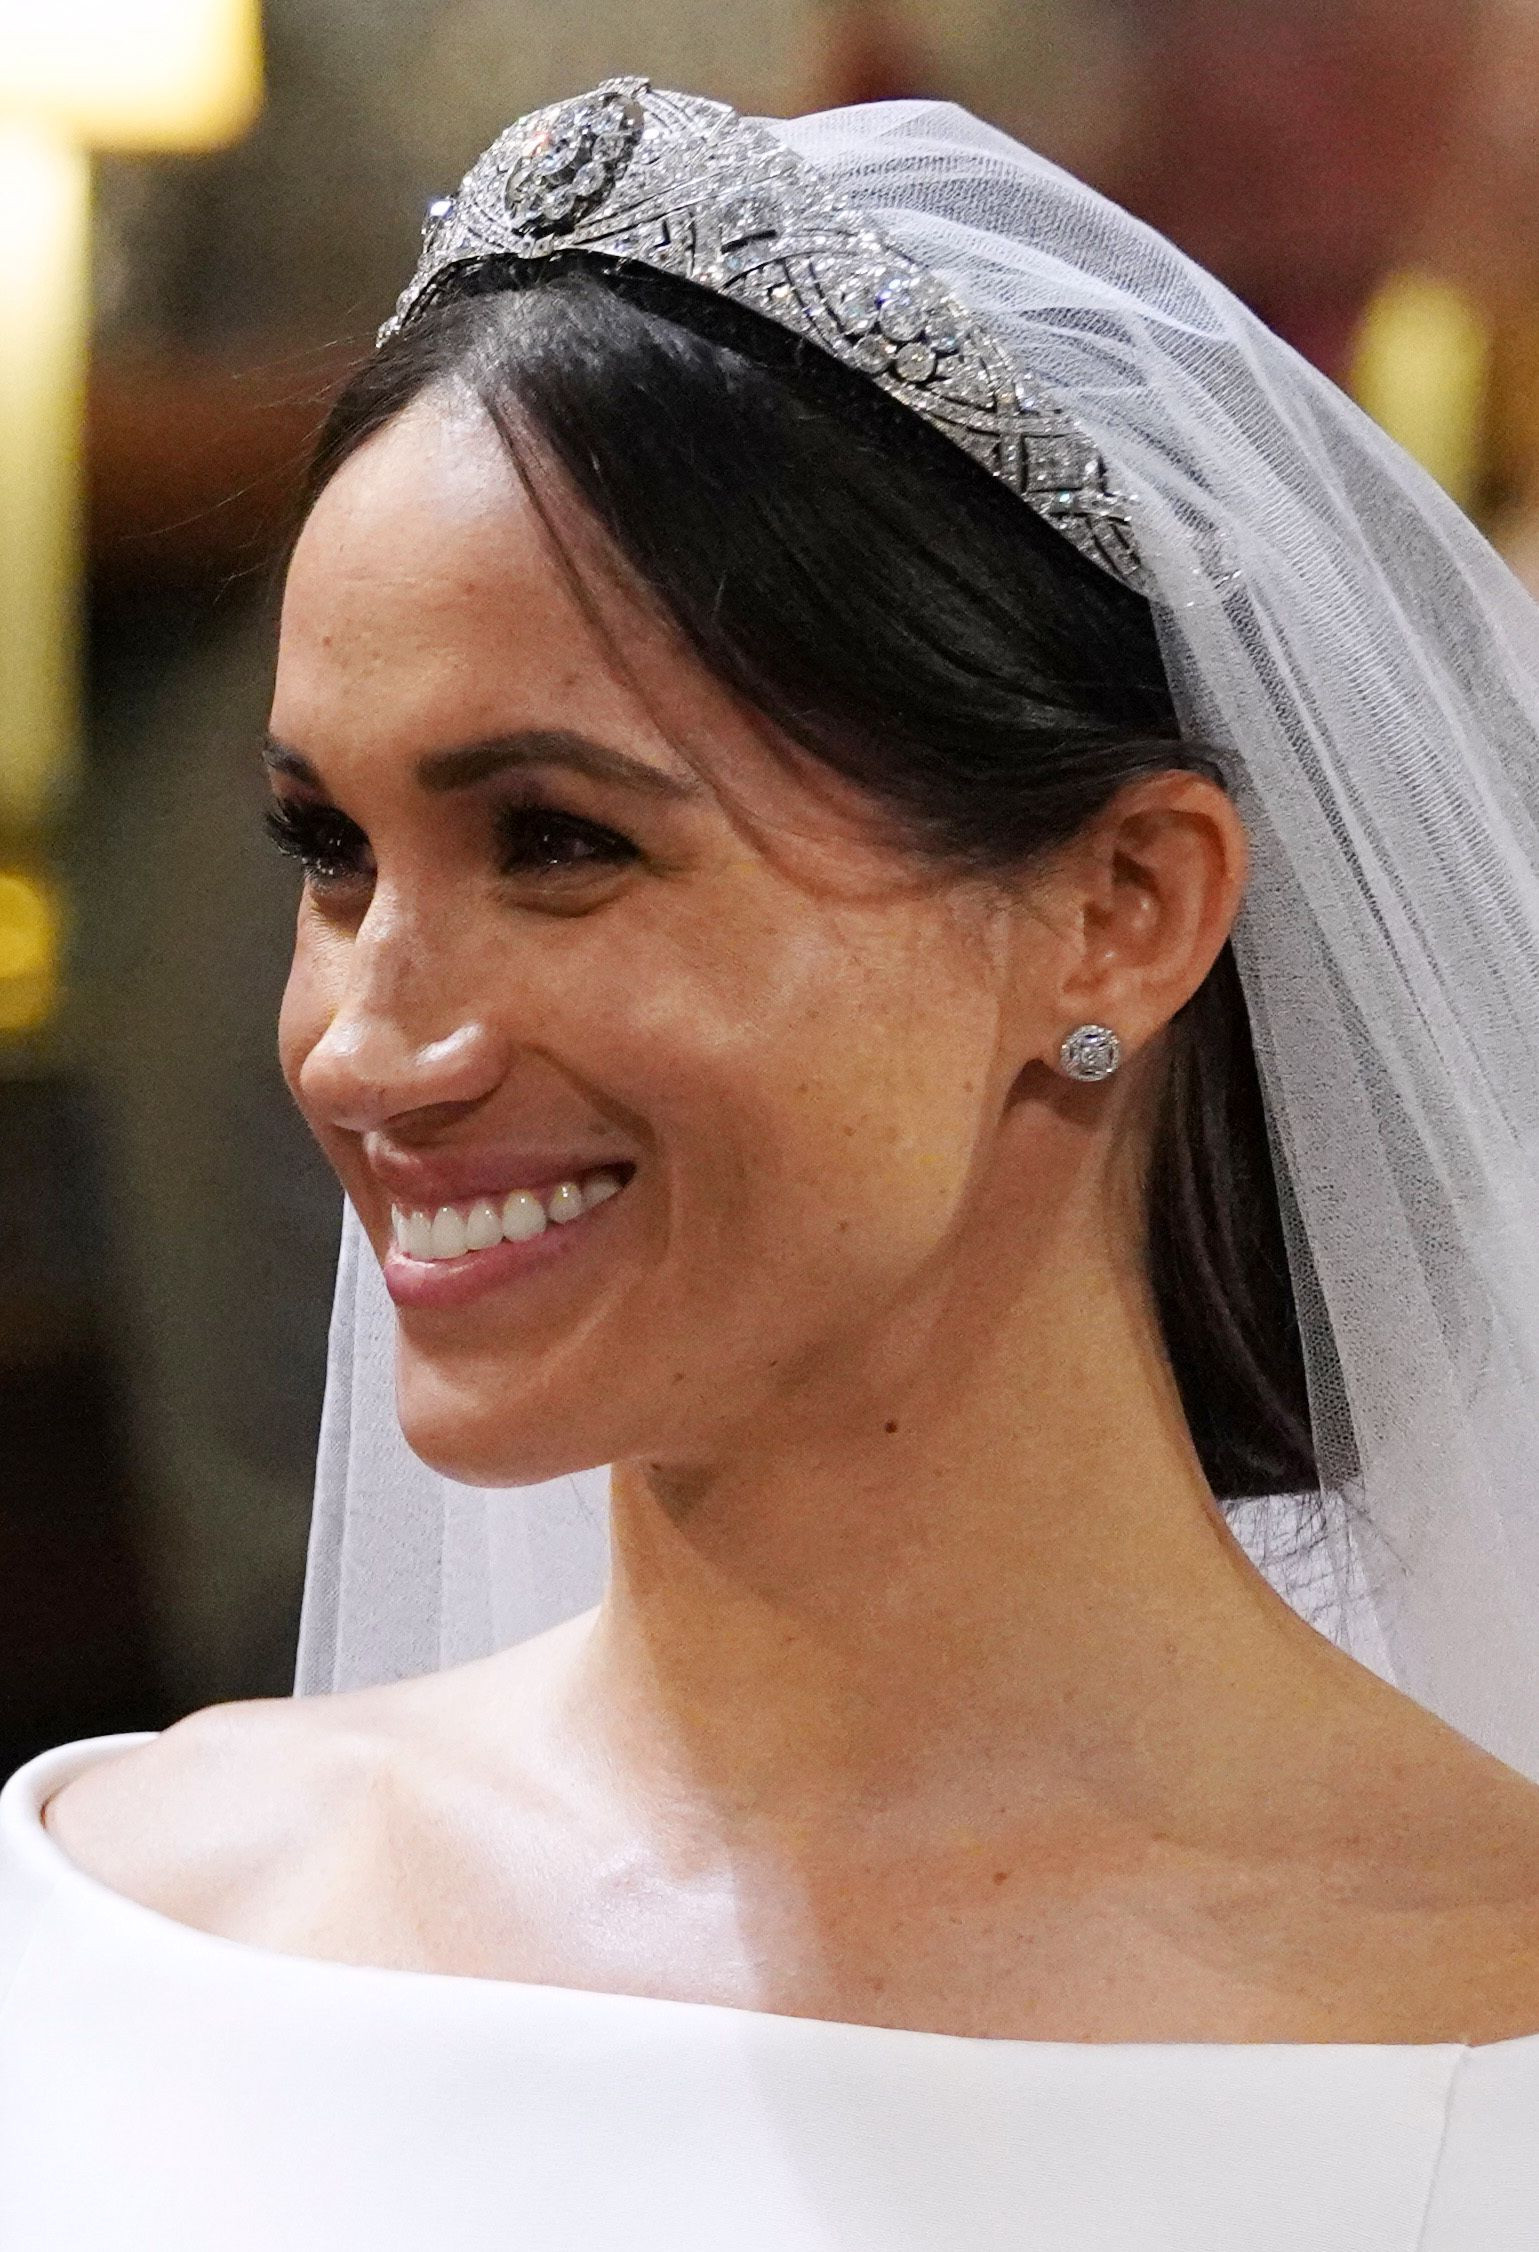 Missy Stone Pre Wedding Gift
 All the Jewelry Meghan Markle Wore for the Royal Wedding